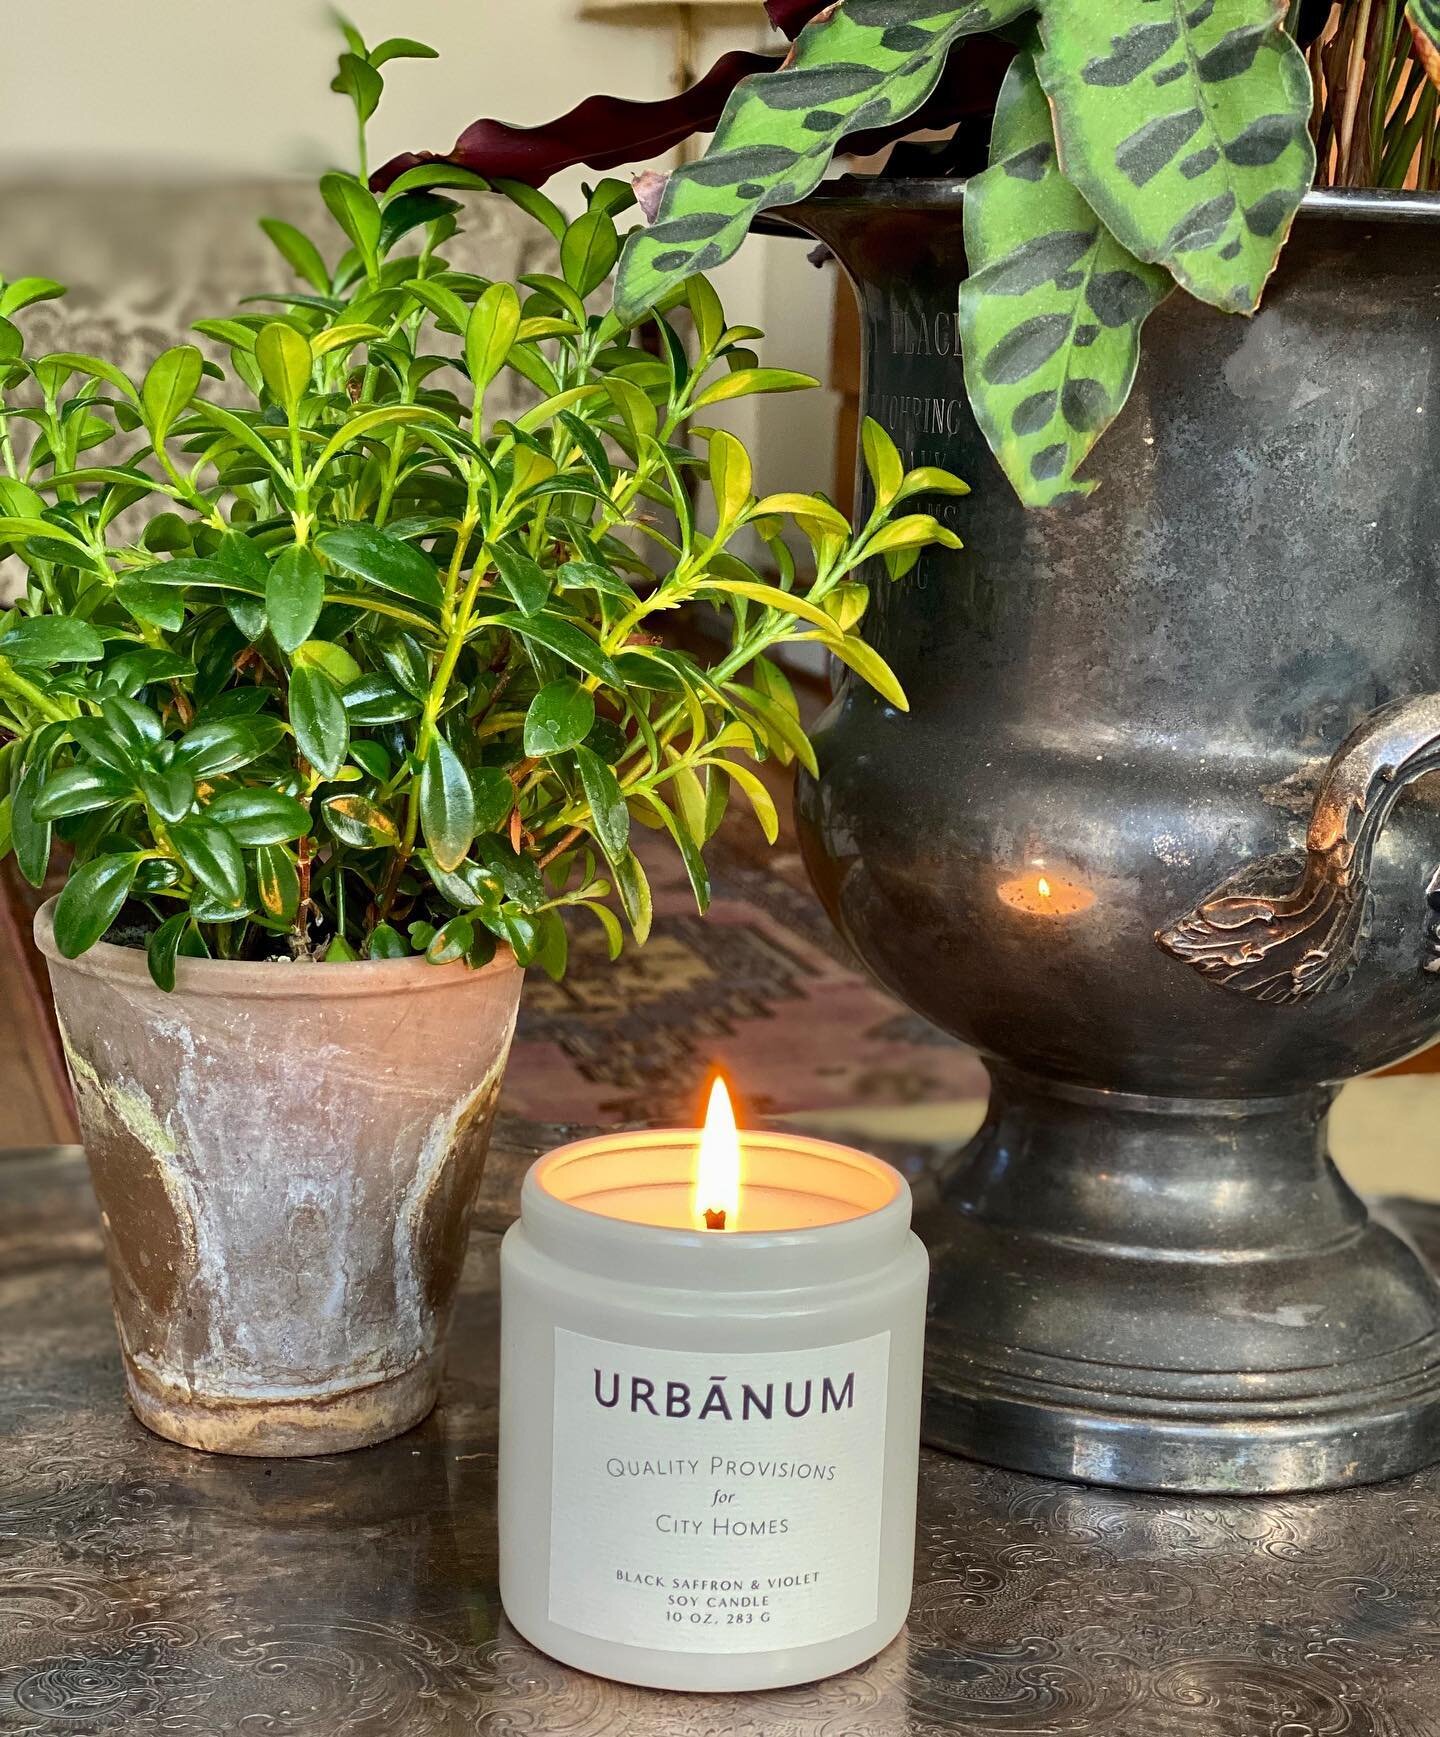 We are excited to introduce a new candle line made exclusively for Urbanum!  With three unique scents, high-quality soy, and a long burn time, these candles come in two sizes.  The larger size even has a layer of copper glitter - matching the copper 